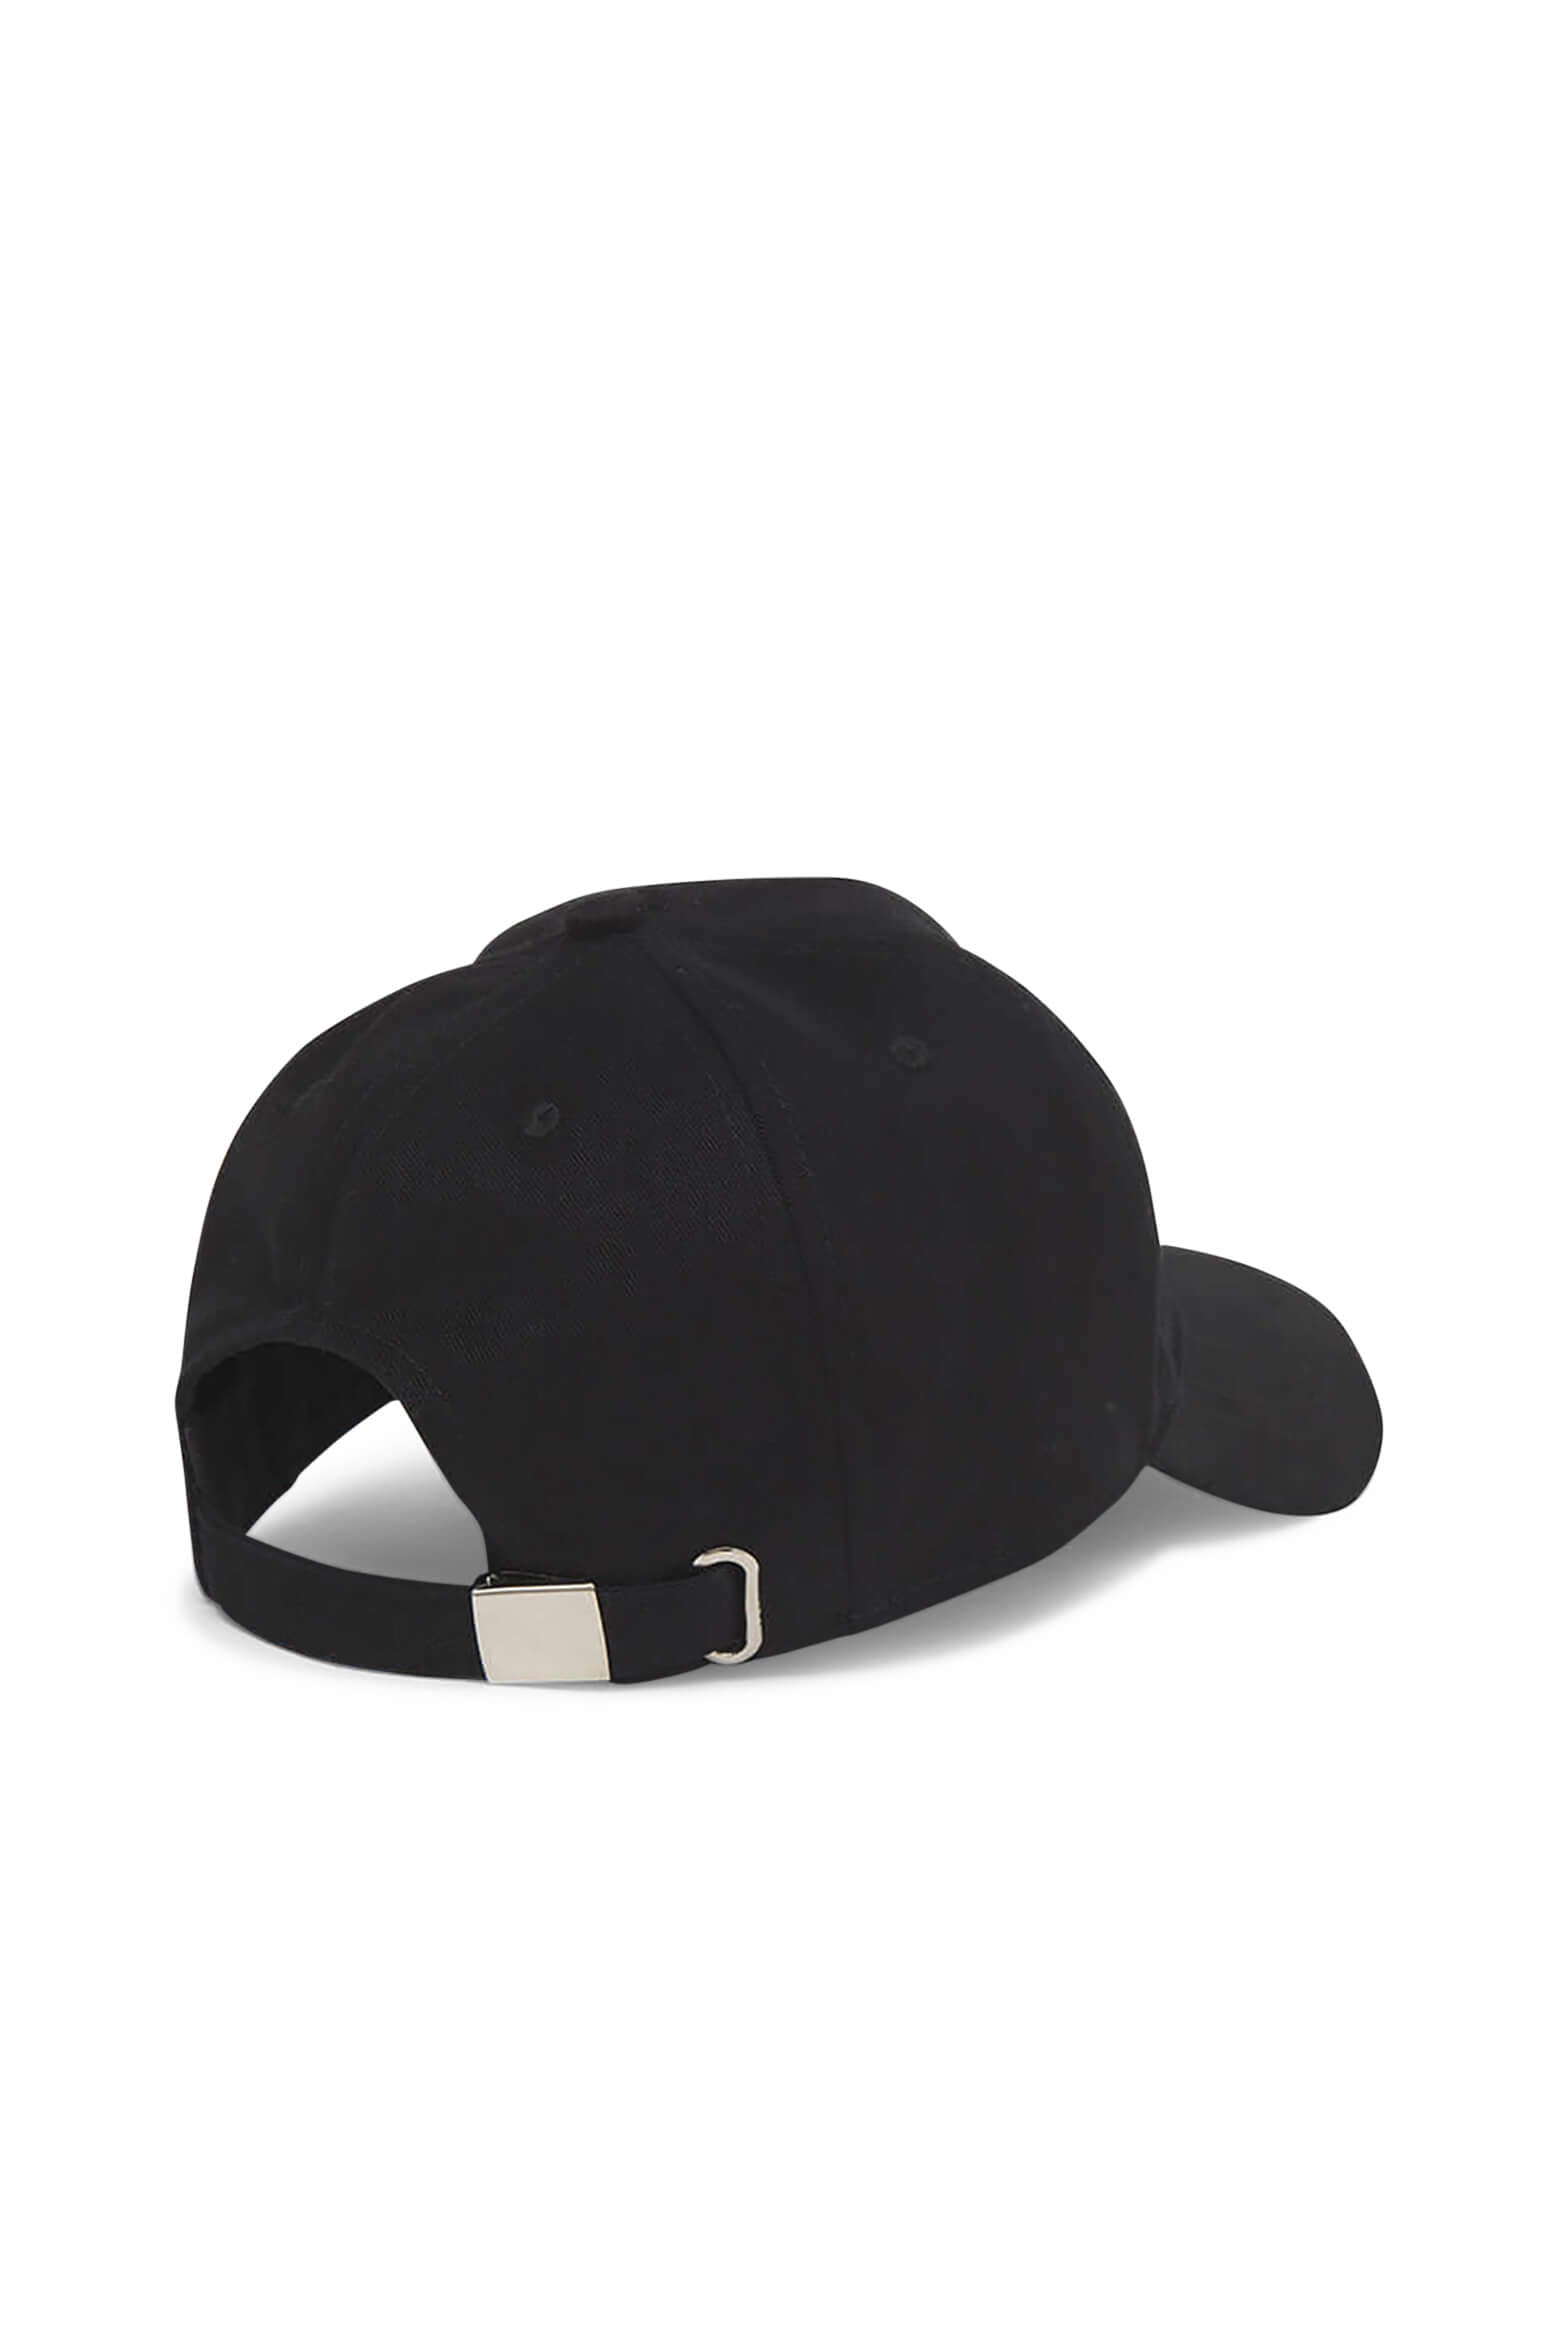 Anine Bing Jeremy Cap in Black from The New Trend 